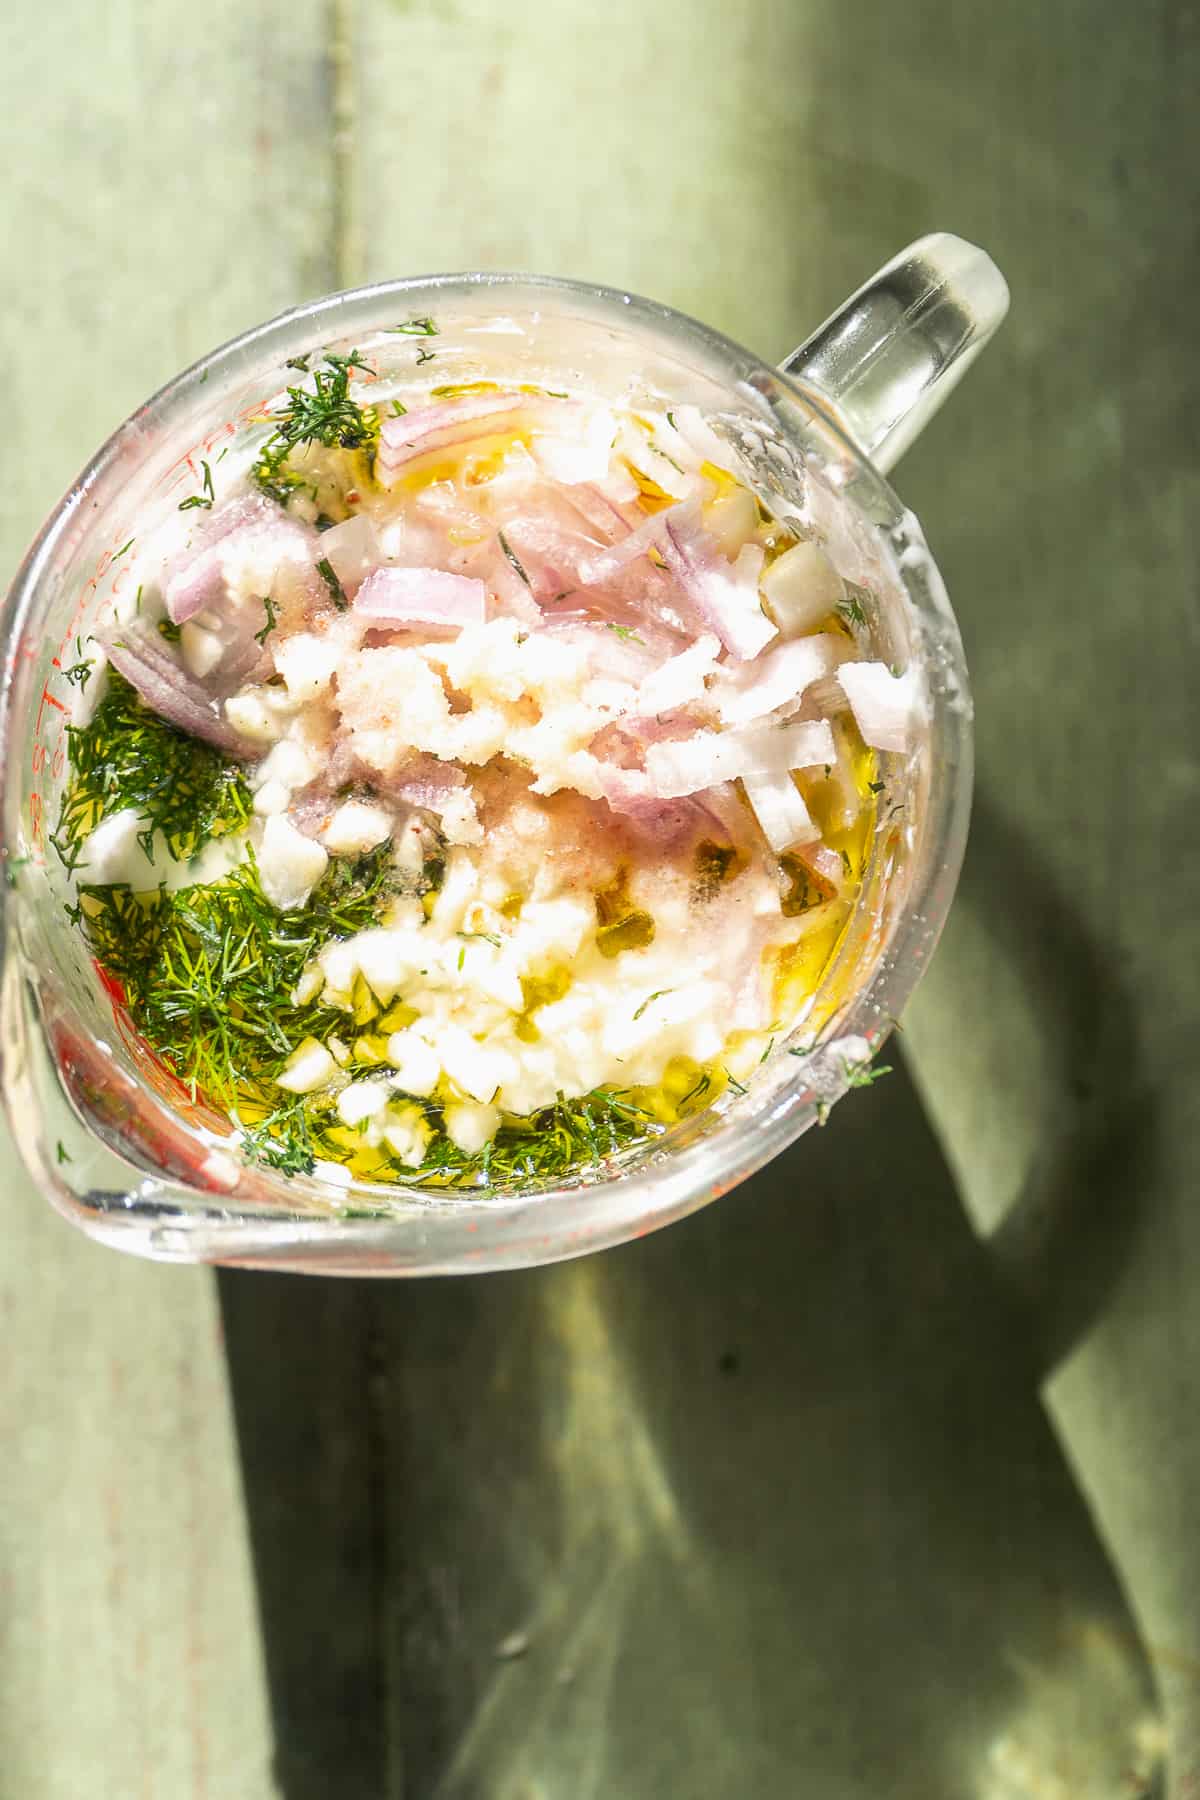 Dill greek yogurt dressing in a measuring cup about to be mixed.